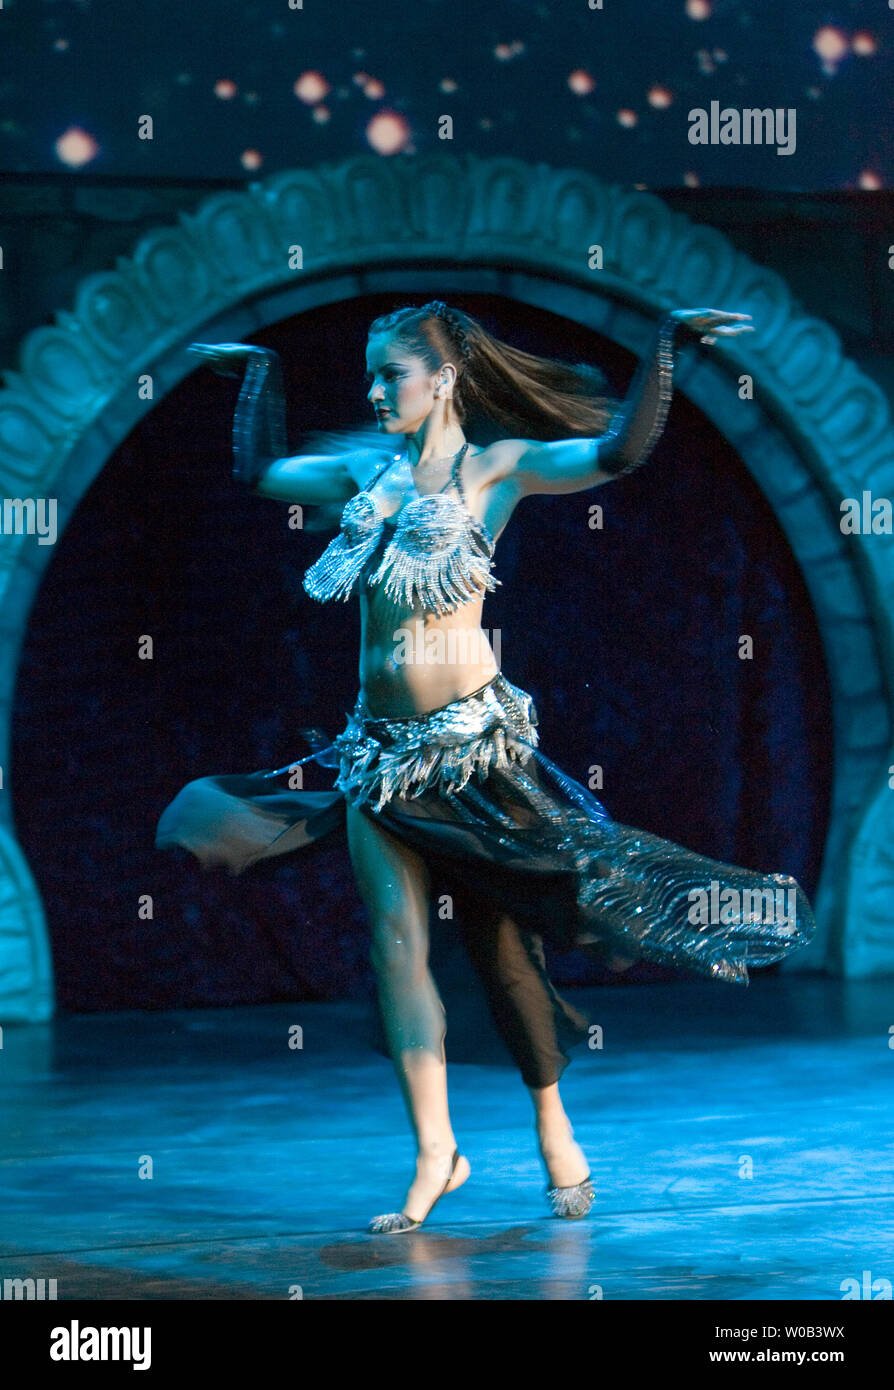 A scene from 'Night of the Sultans - Performing Pandora's Legend' a new version of the saga of Prometheus created by German author, director and actor Rufus Beck and produced by Marcel Avram, opens to a full house at Richmond's River Rock Casino, near Vancouver, British Columbia, May 30, 2006. The show opens next at New York's Radio City Music Hall after finishing it's engagement at River Rock Casino June 11th.    (UPI Photo/Heinz Ruckemann) Stock Photo